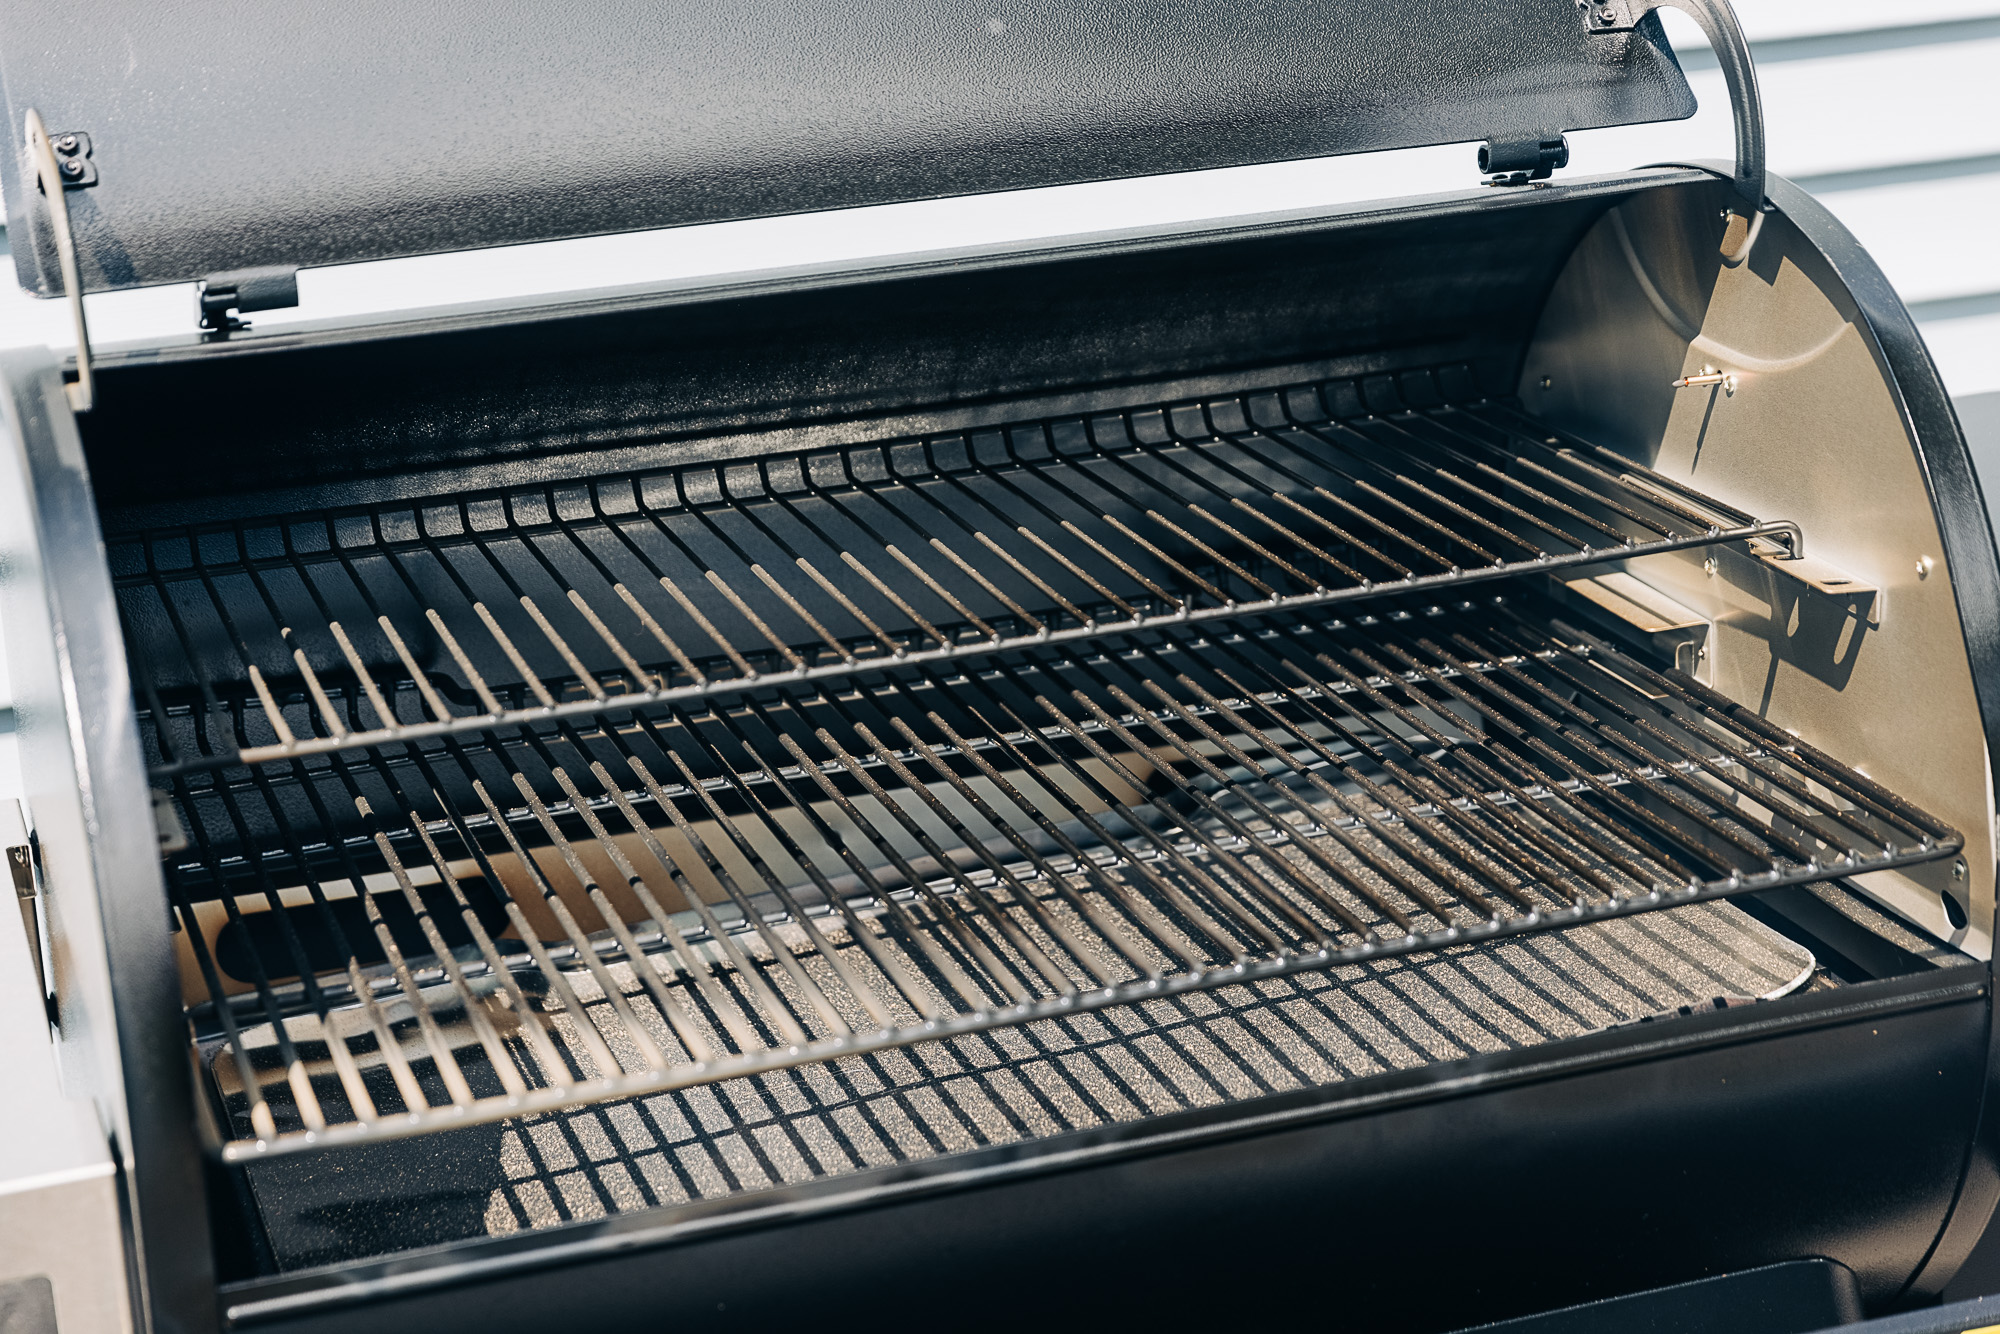 Inside of the Traeger Ironwood 885 pellet grill